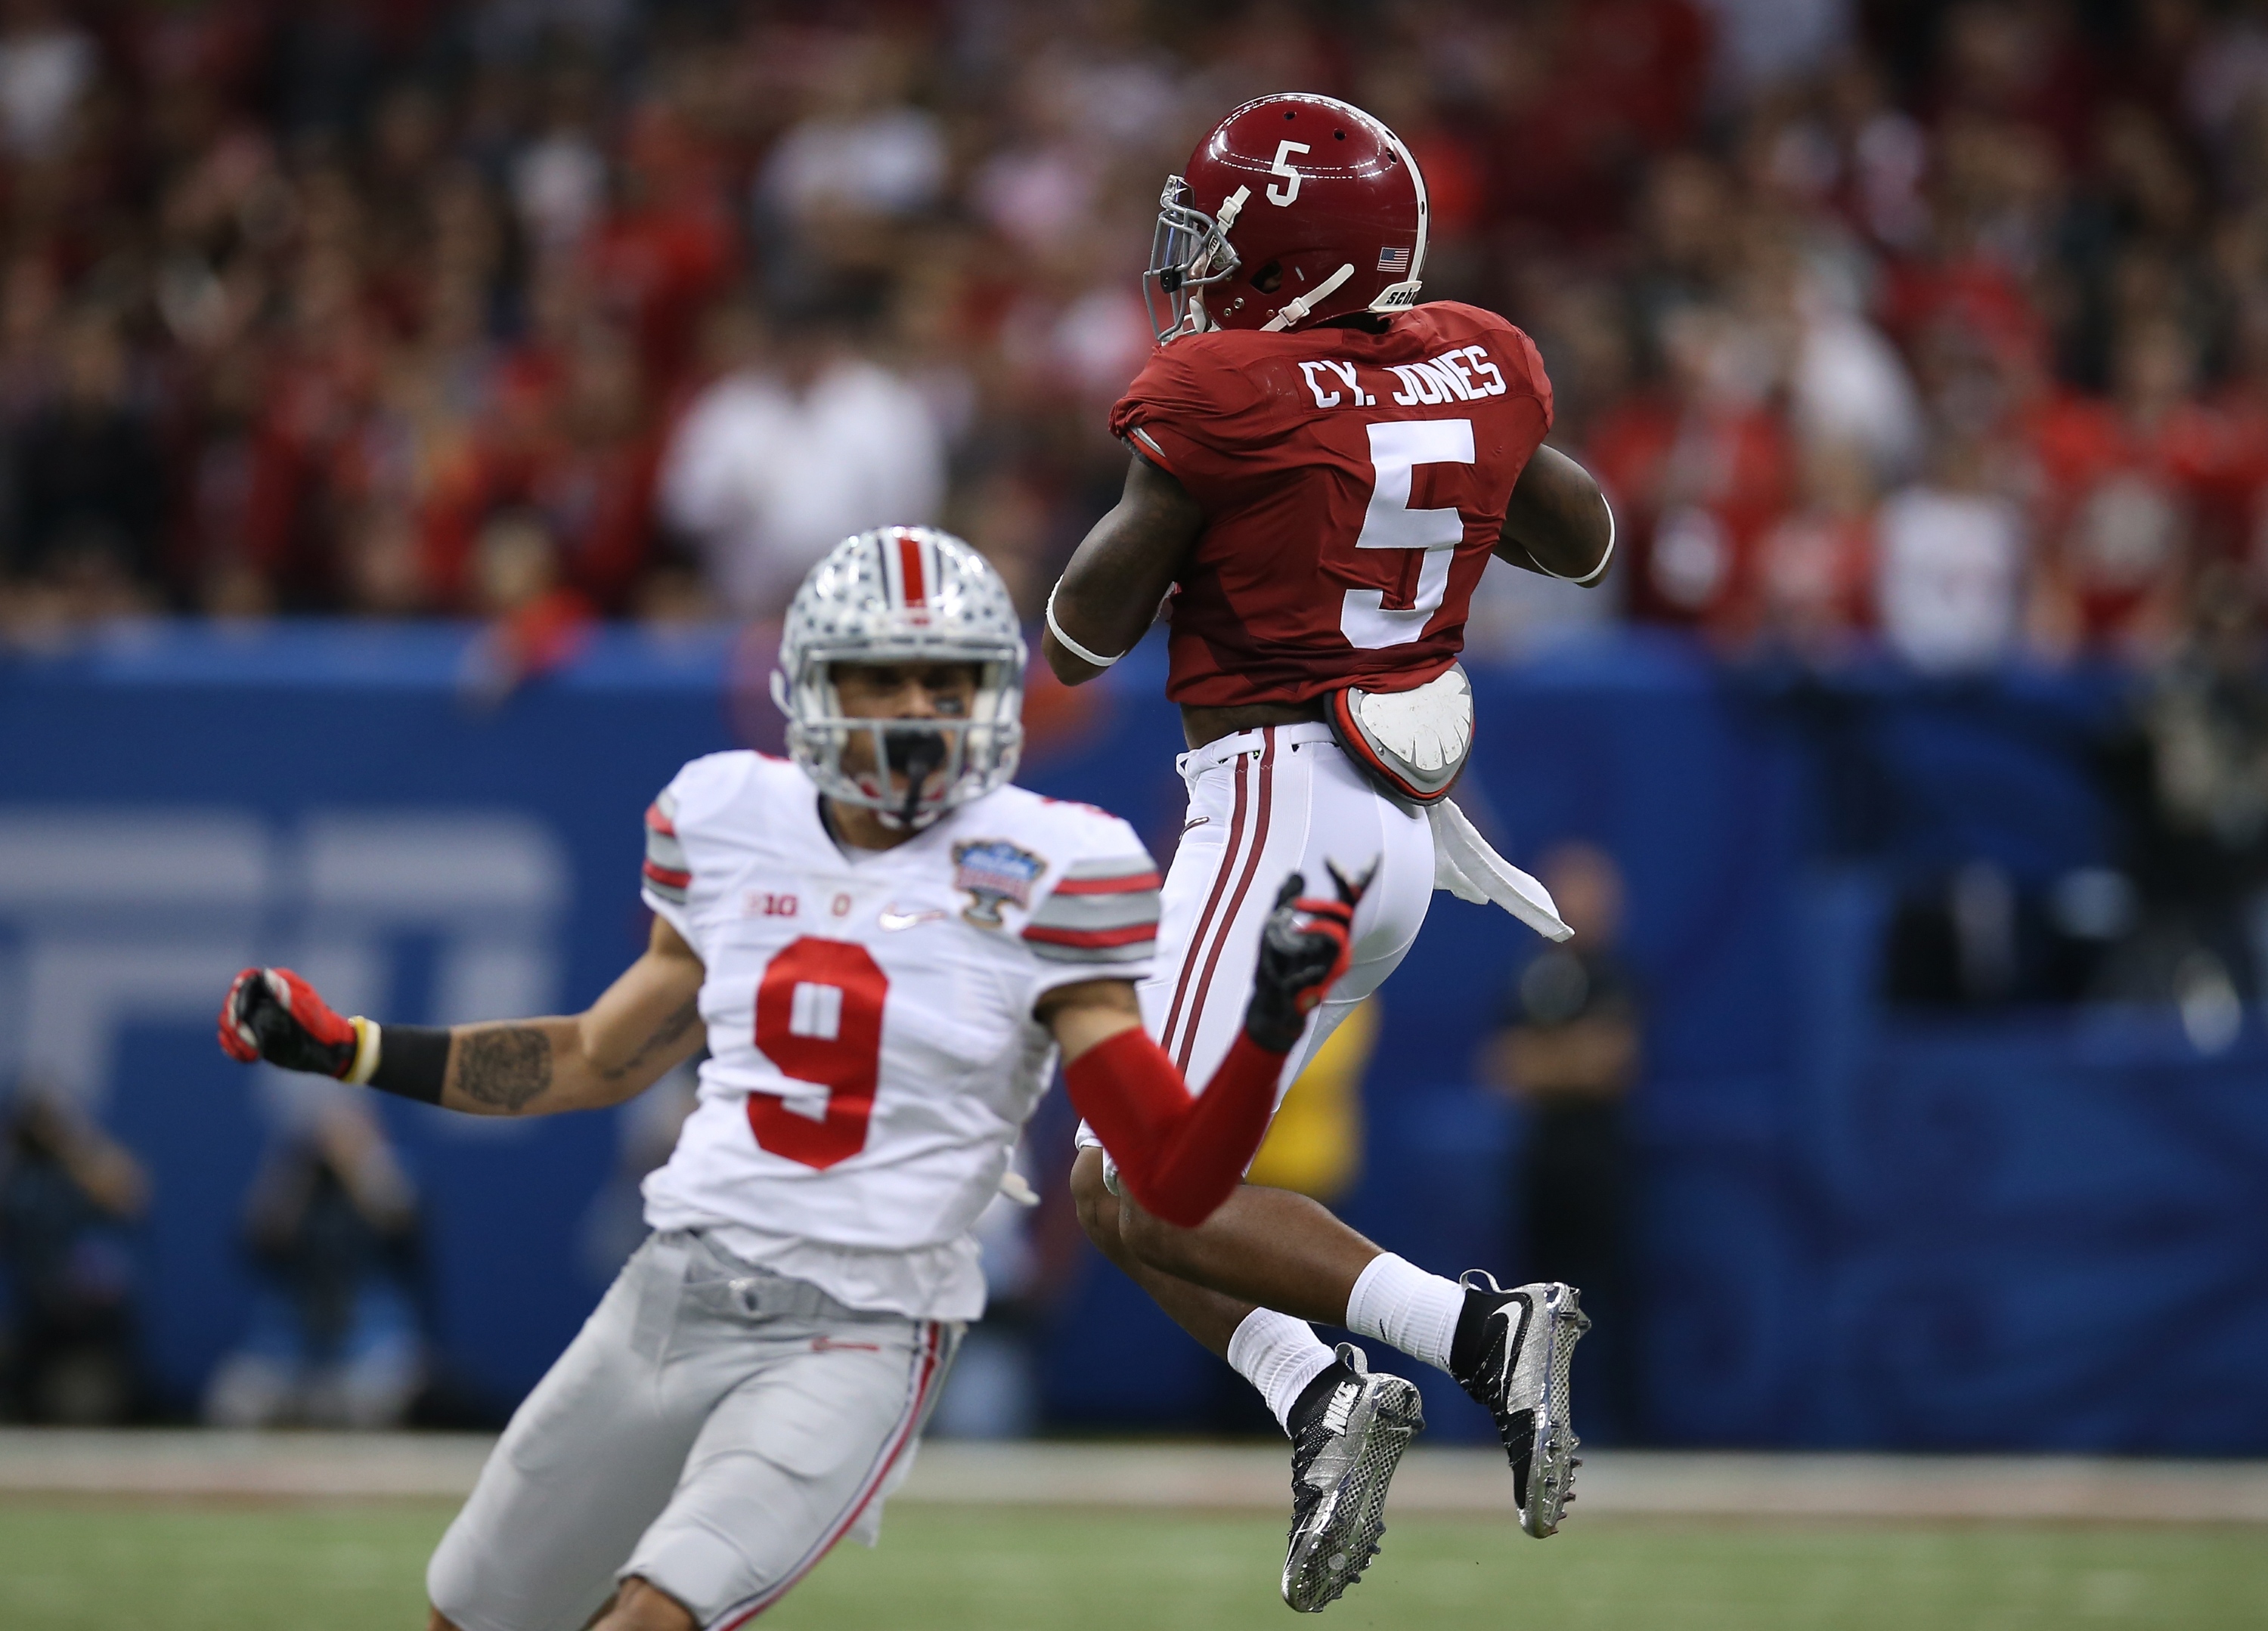 Cyrus Jones #5 of the Alabama Crimson Tide intercepts a ball intended for Devin Smith #9 of the Ohio State Buckeyes during the All State Sugar Bowl. (Photo by Chris Graythen/Getty Images)